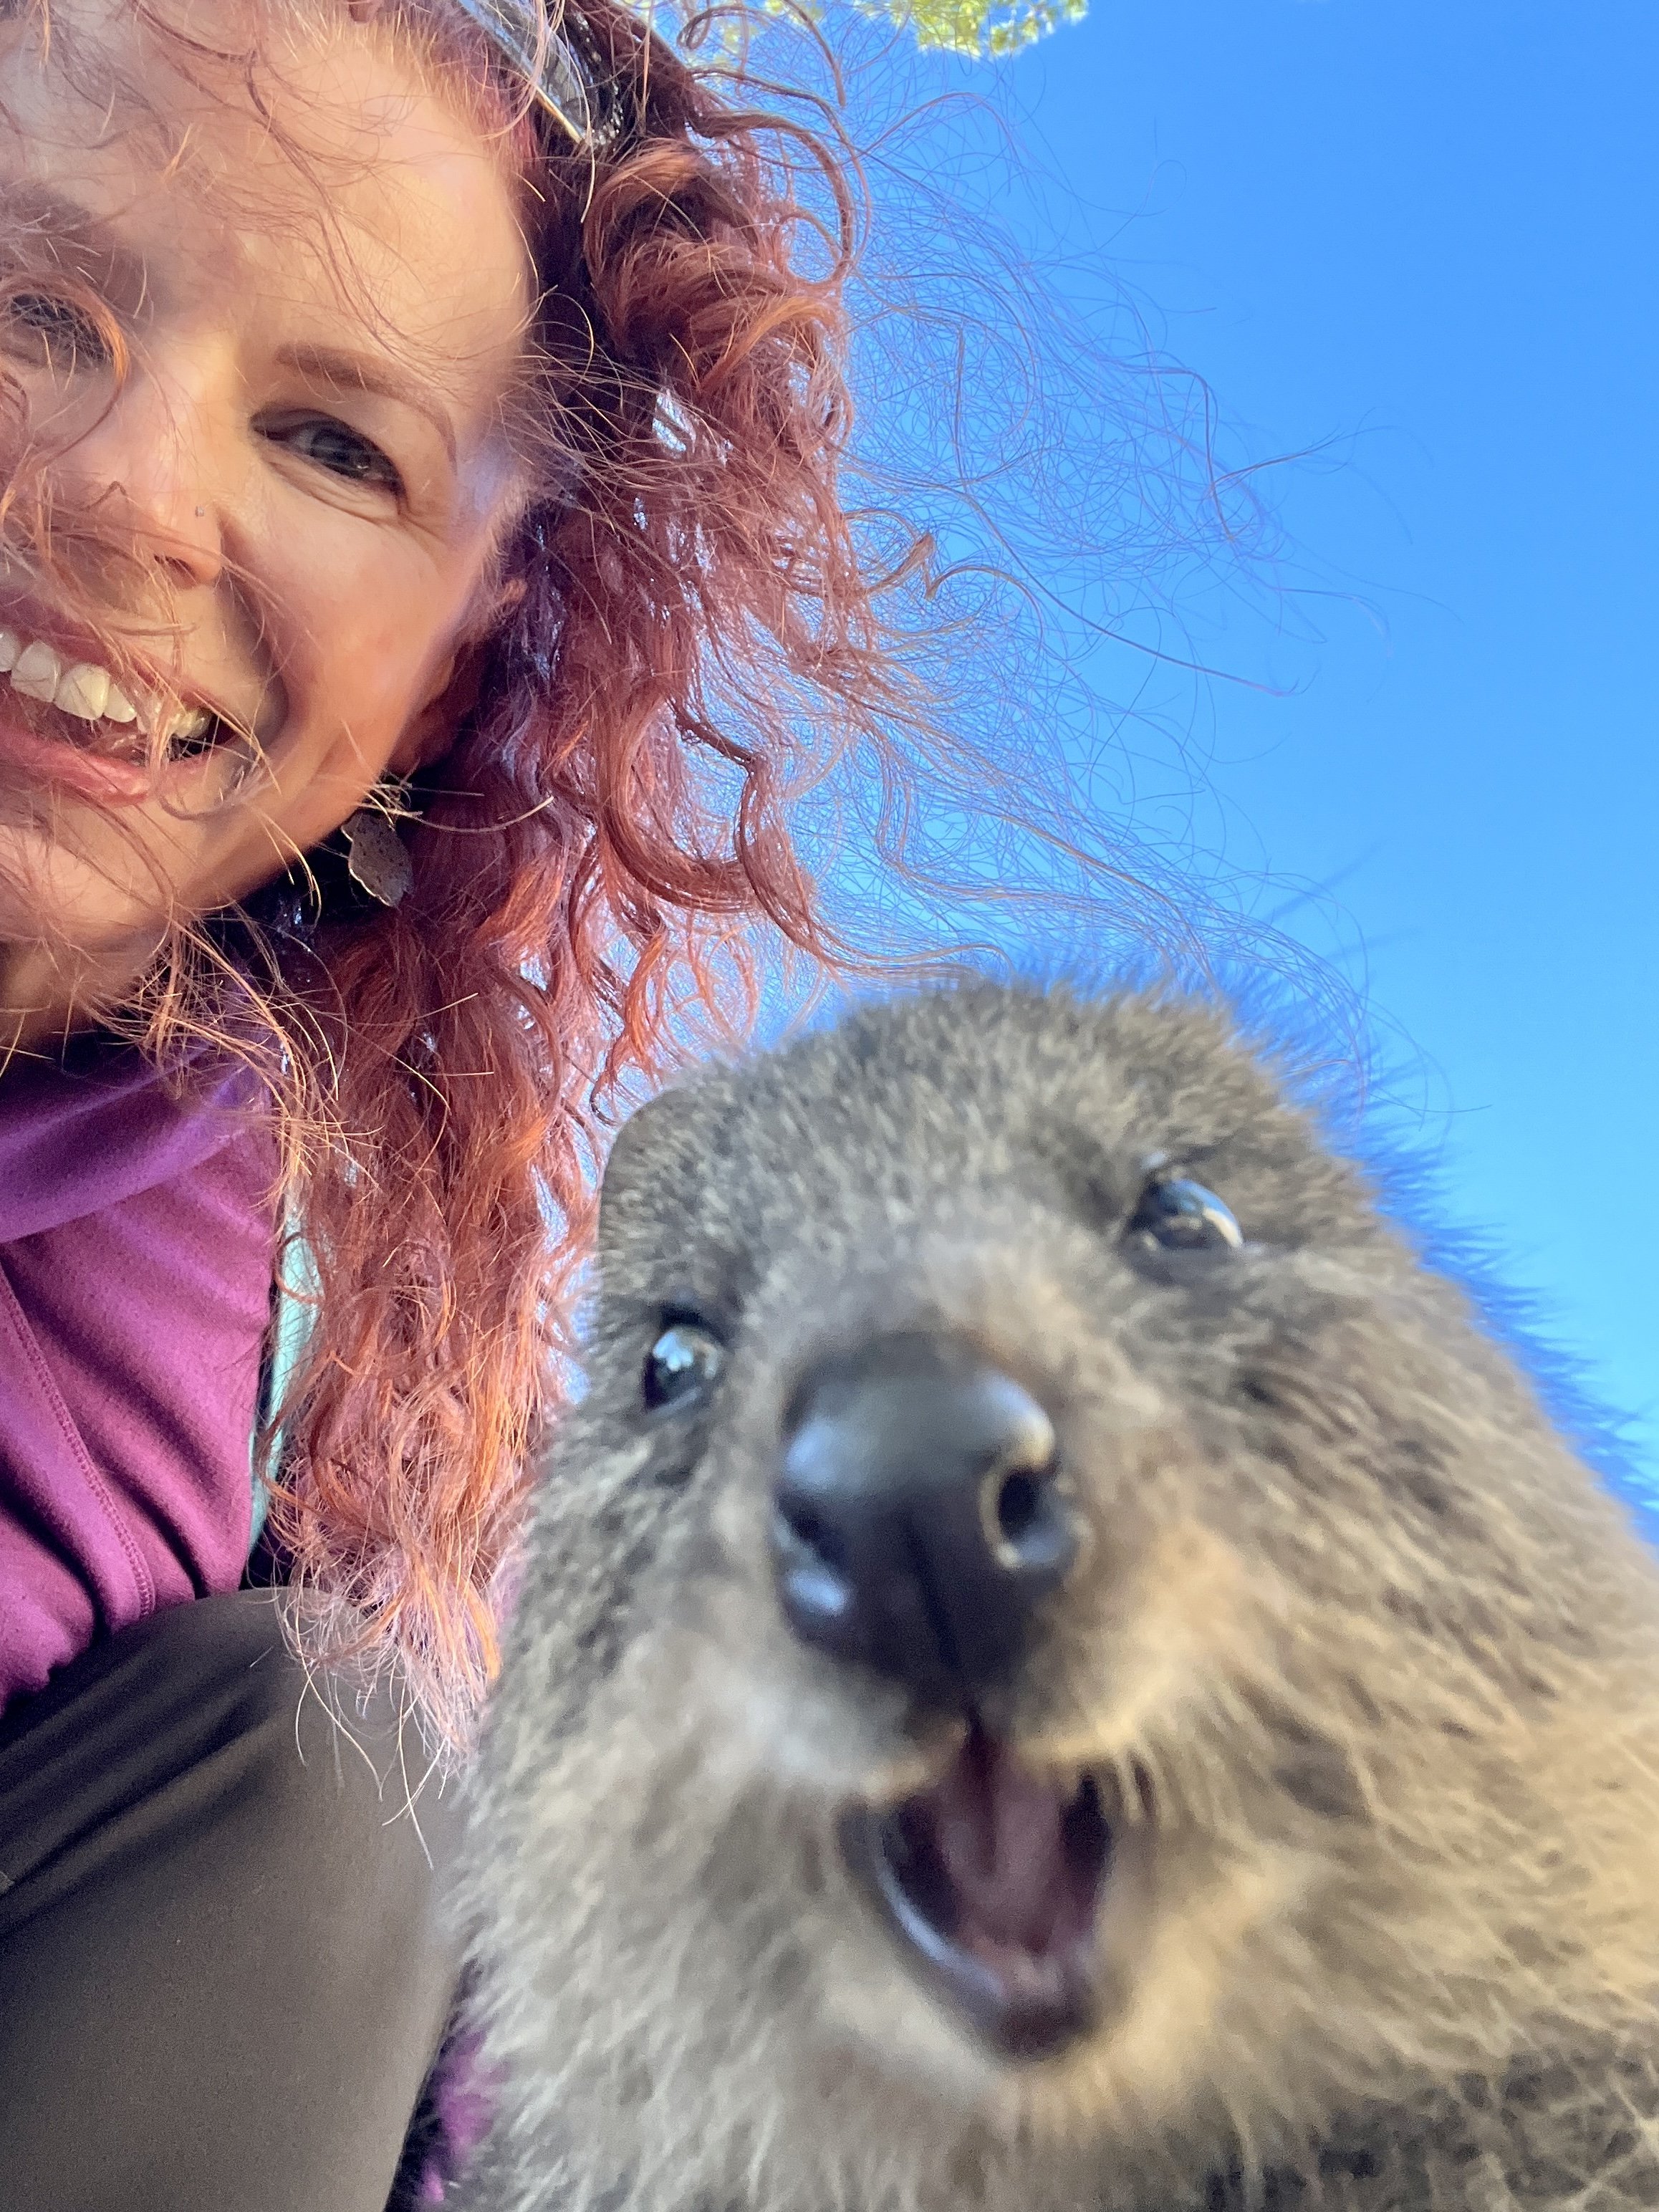 Quokkas look so excited!